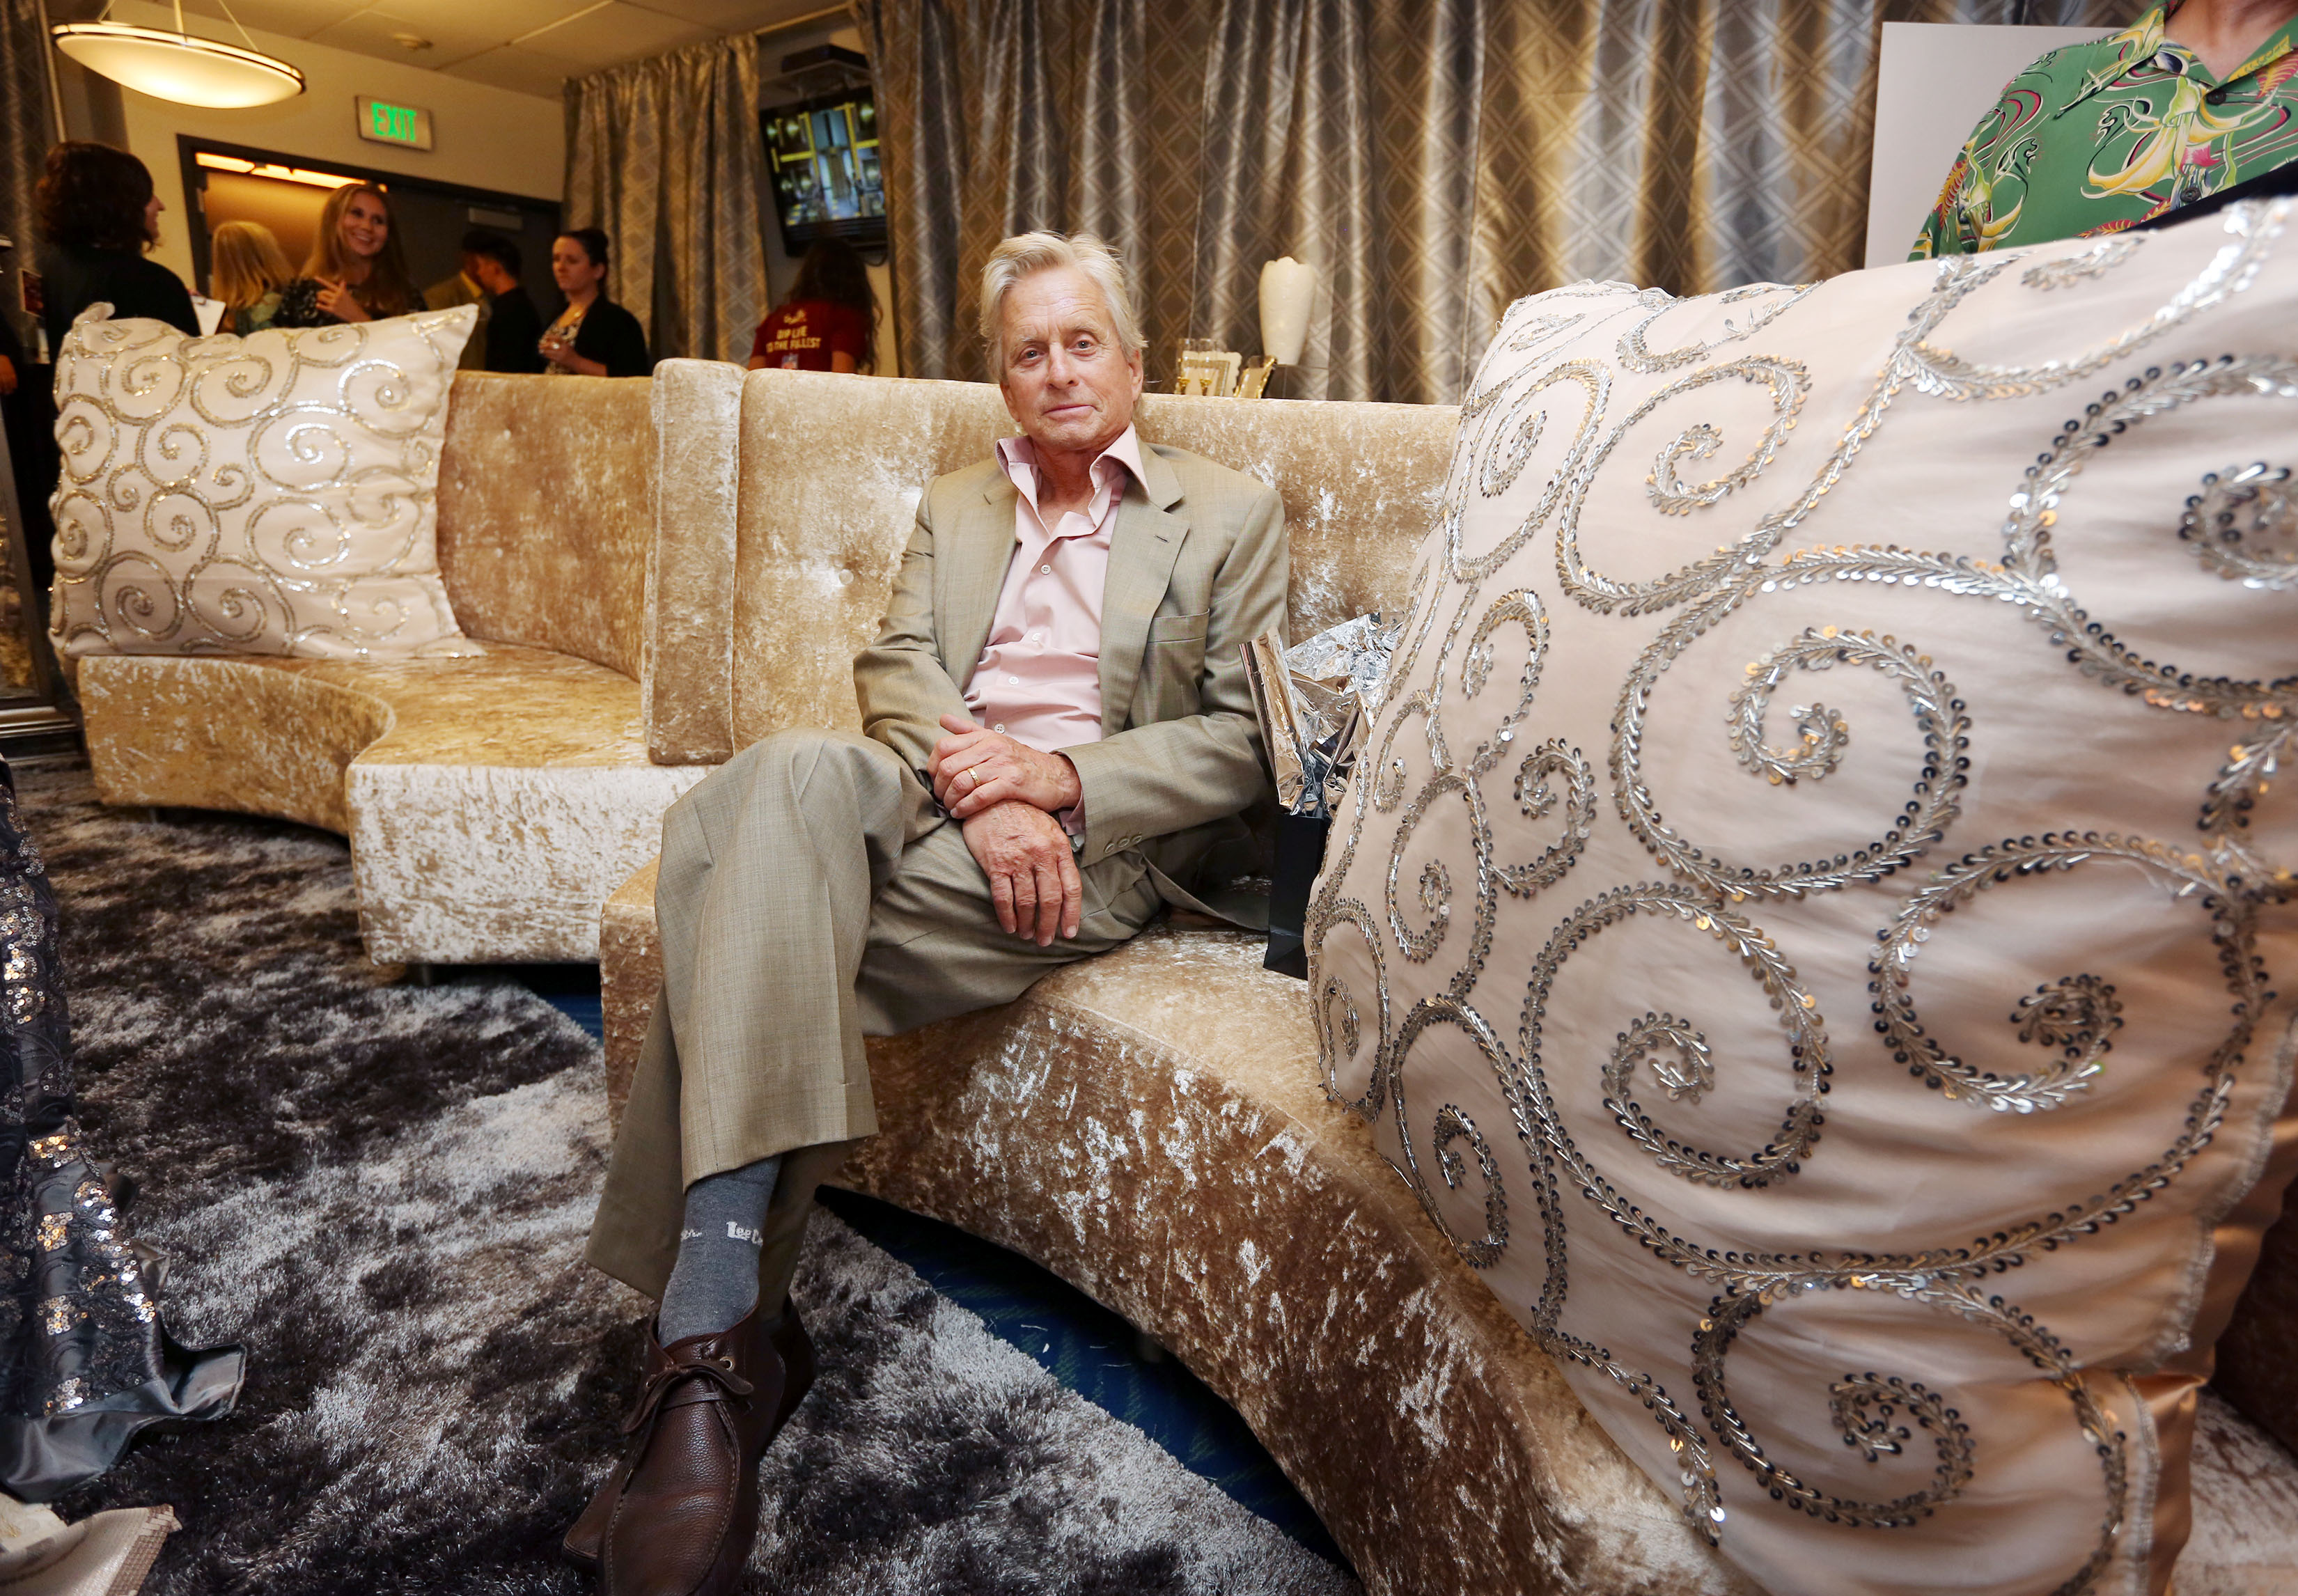 Sitting on shades of gold, Michael Douglas relaxes on one of Lux Lounge EFR's custom made luxurious furniture designs